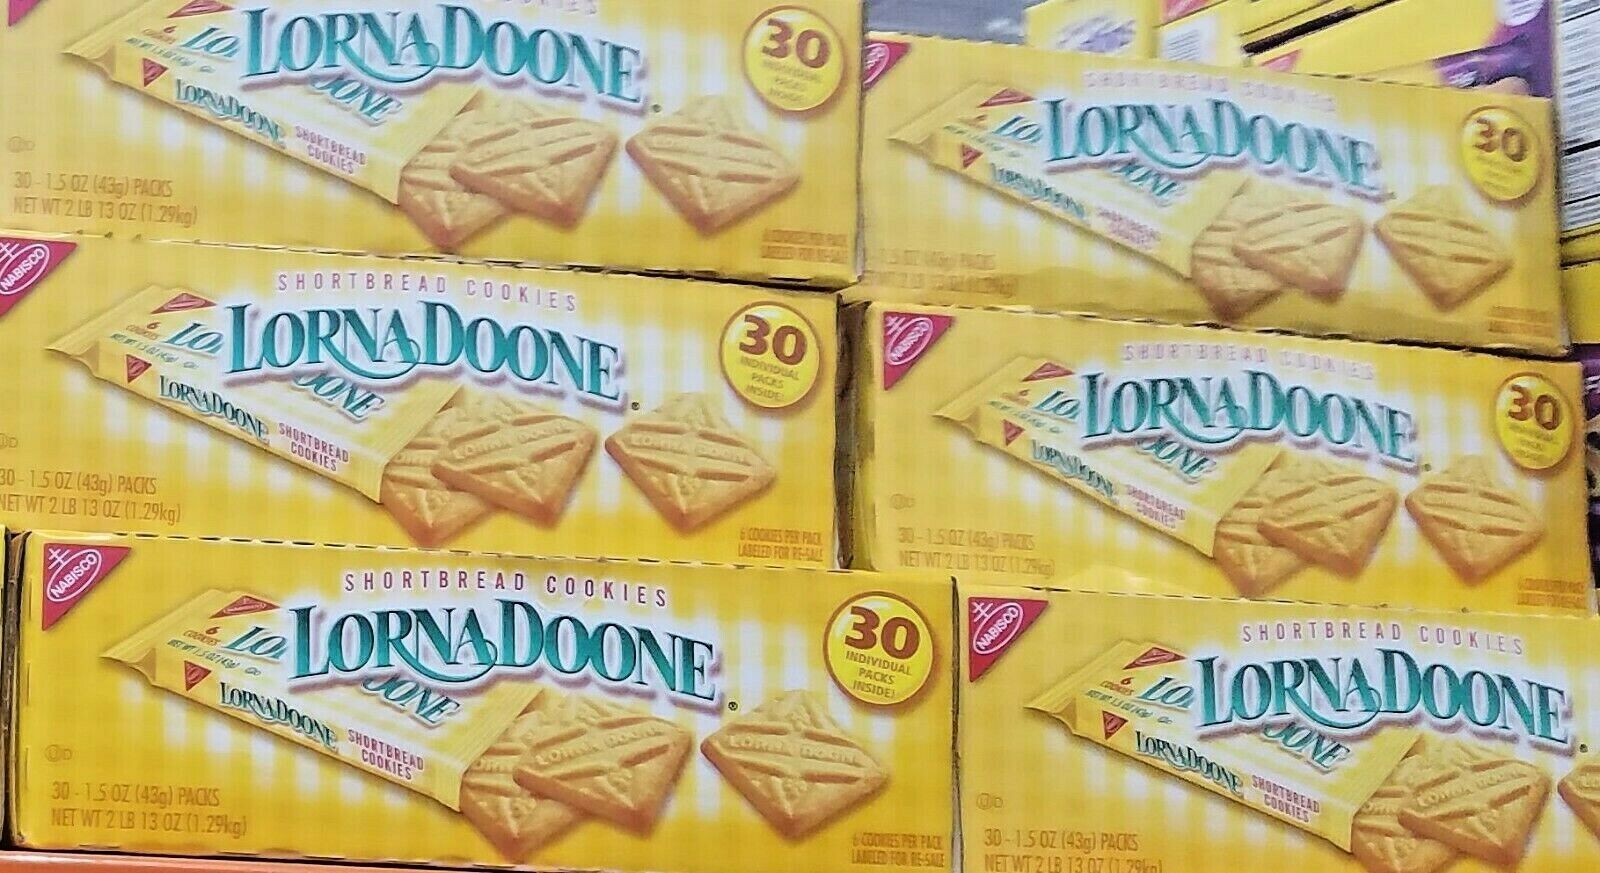 Primary image for 2 PACK SHORTBREAD COOKIES LORNA DOONE (30 PER BOX)